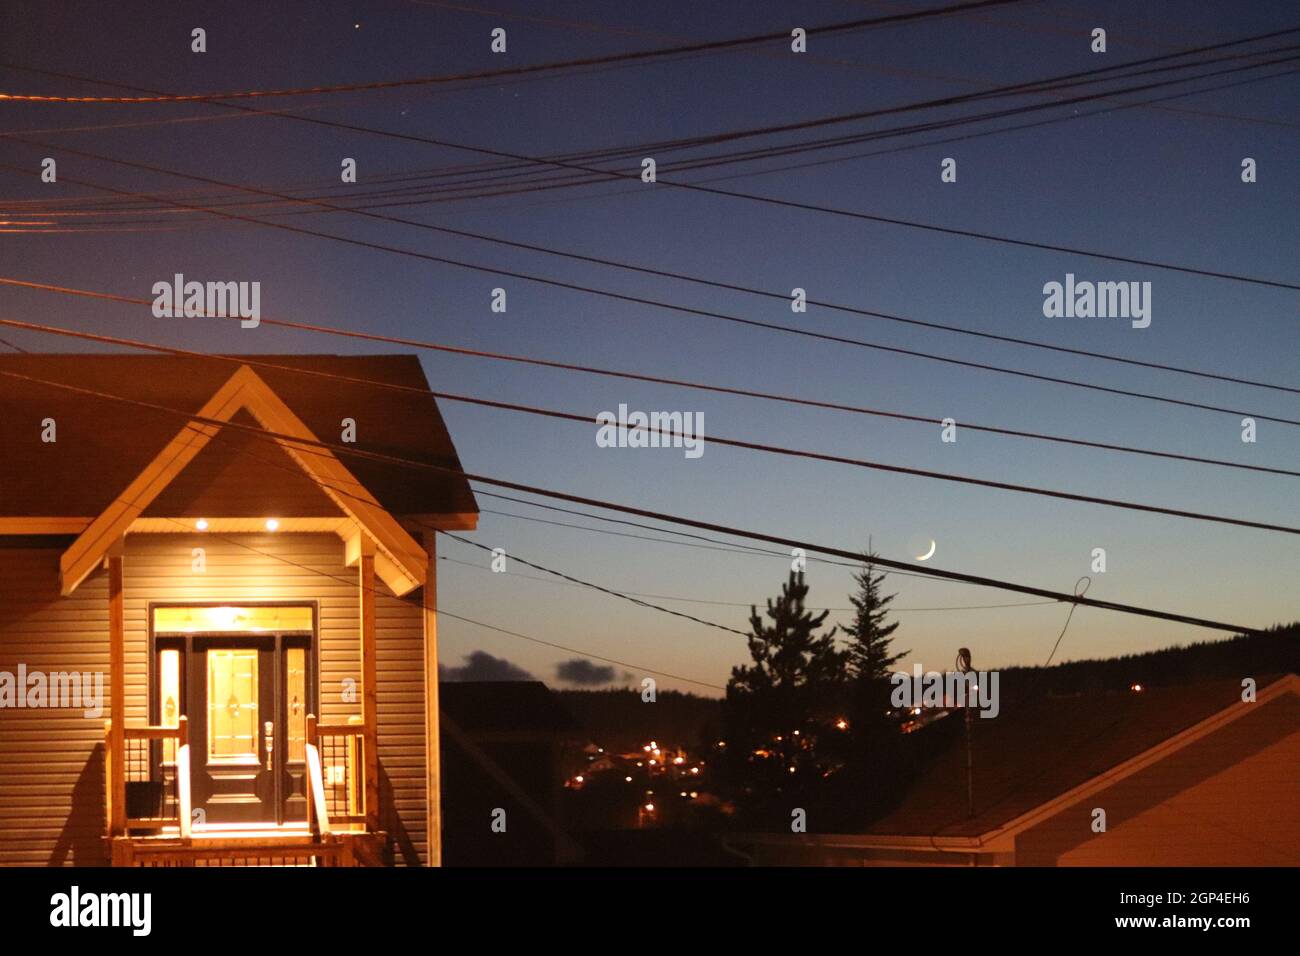 Evening sky with a beautiful, well-lit house, the north star, and the moon. Stock Photo